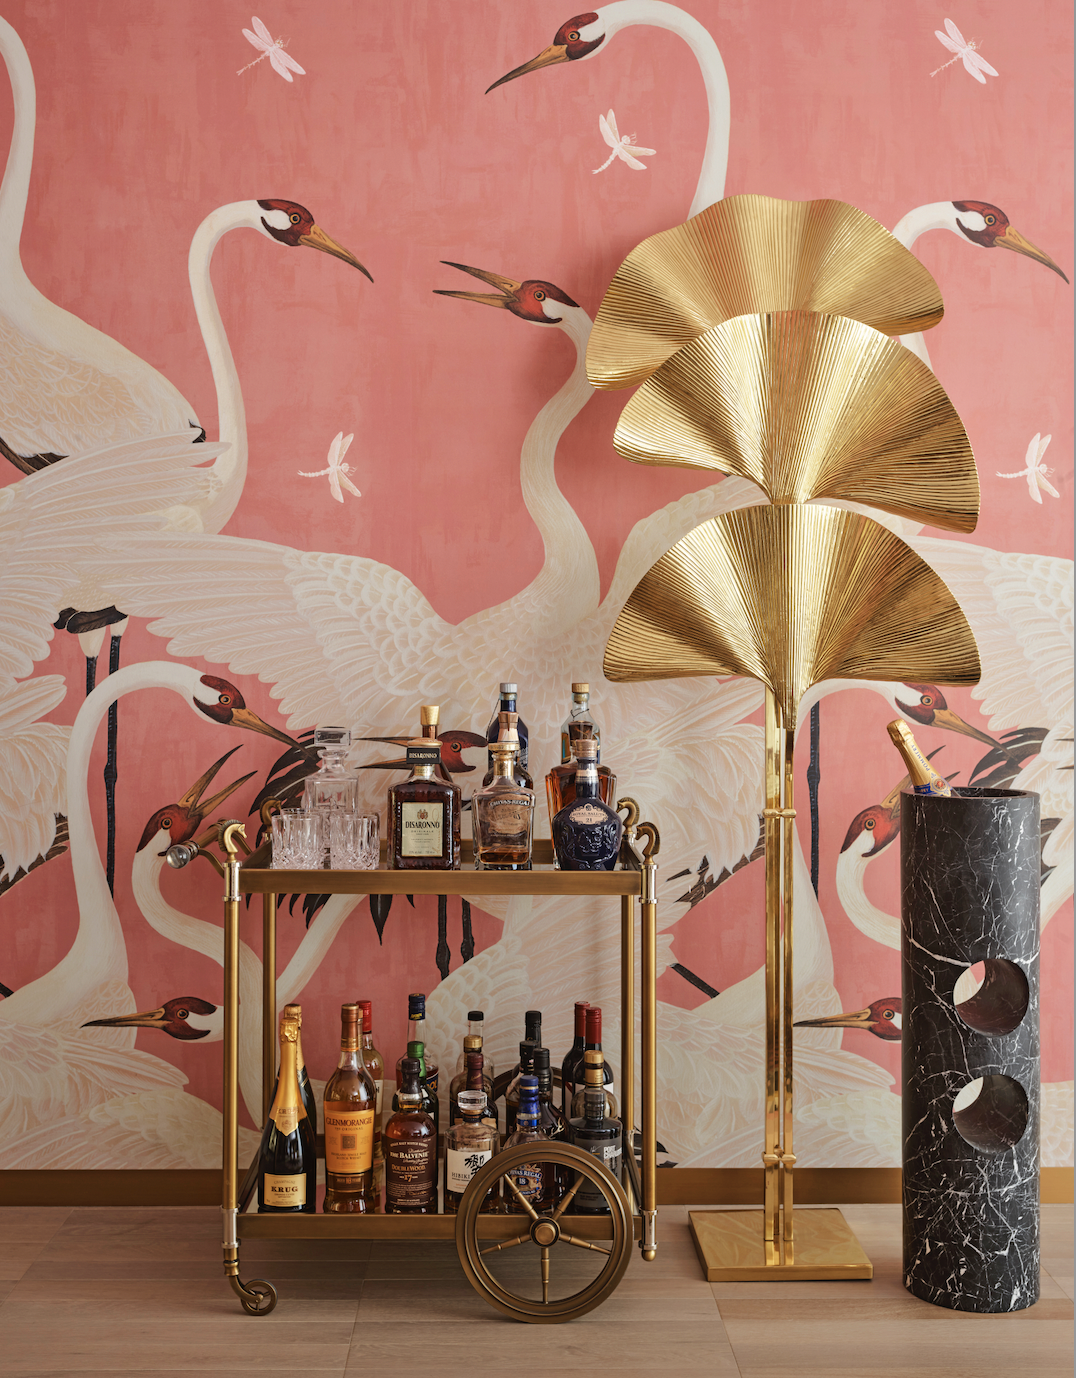 Interior designer Greg Natale says home bars have become popular with clients. Image: Anson Smart